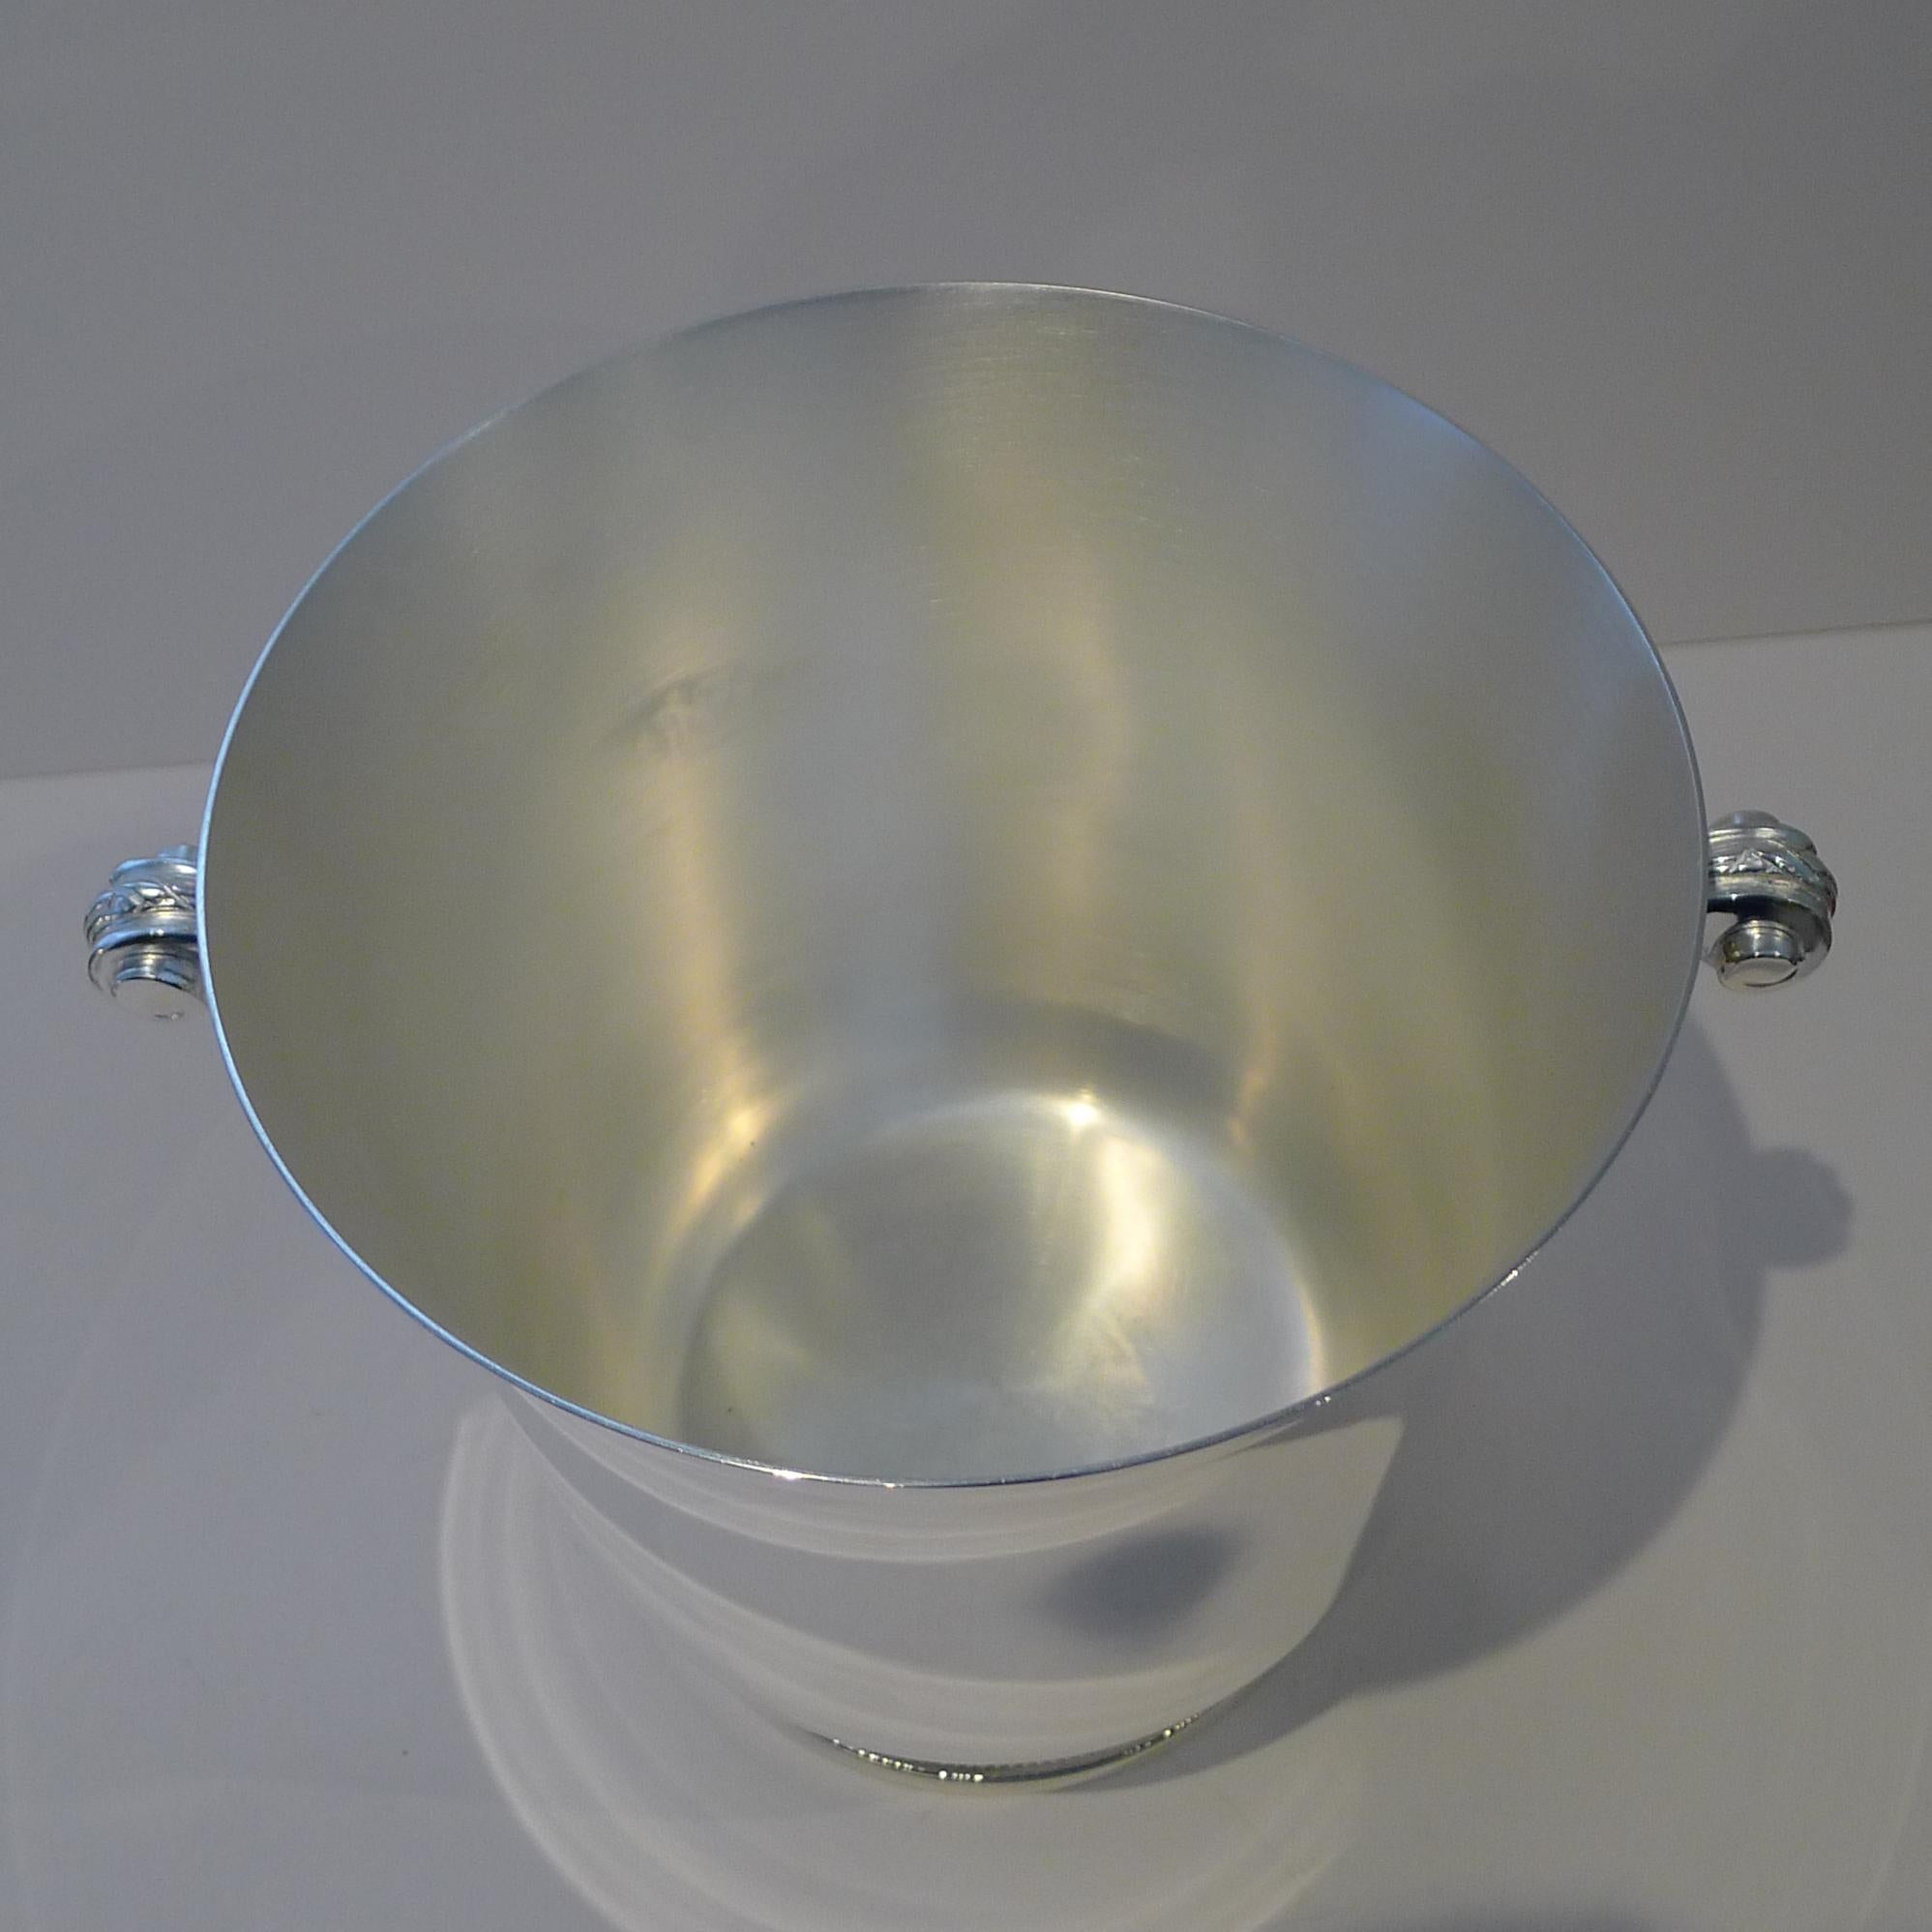 A wonderful vintage wine cooler / Champagne bucket made by the highly prized silversmith, Maison Ercuis.

The simple shape stands on a beaded foot and has two fabulous Art Deco style handles.  The underside is where the signature 